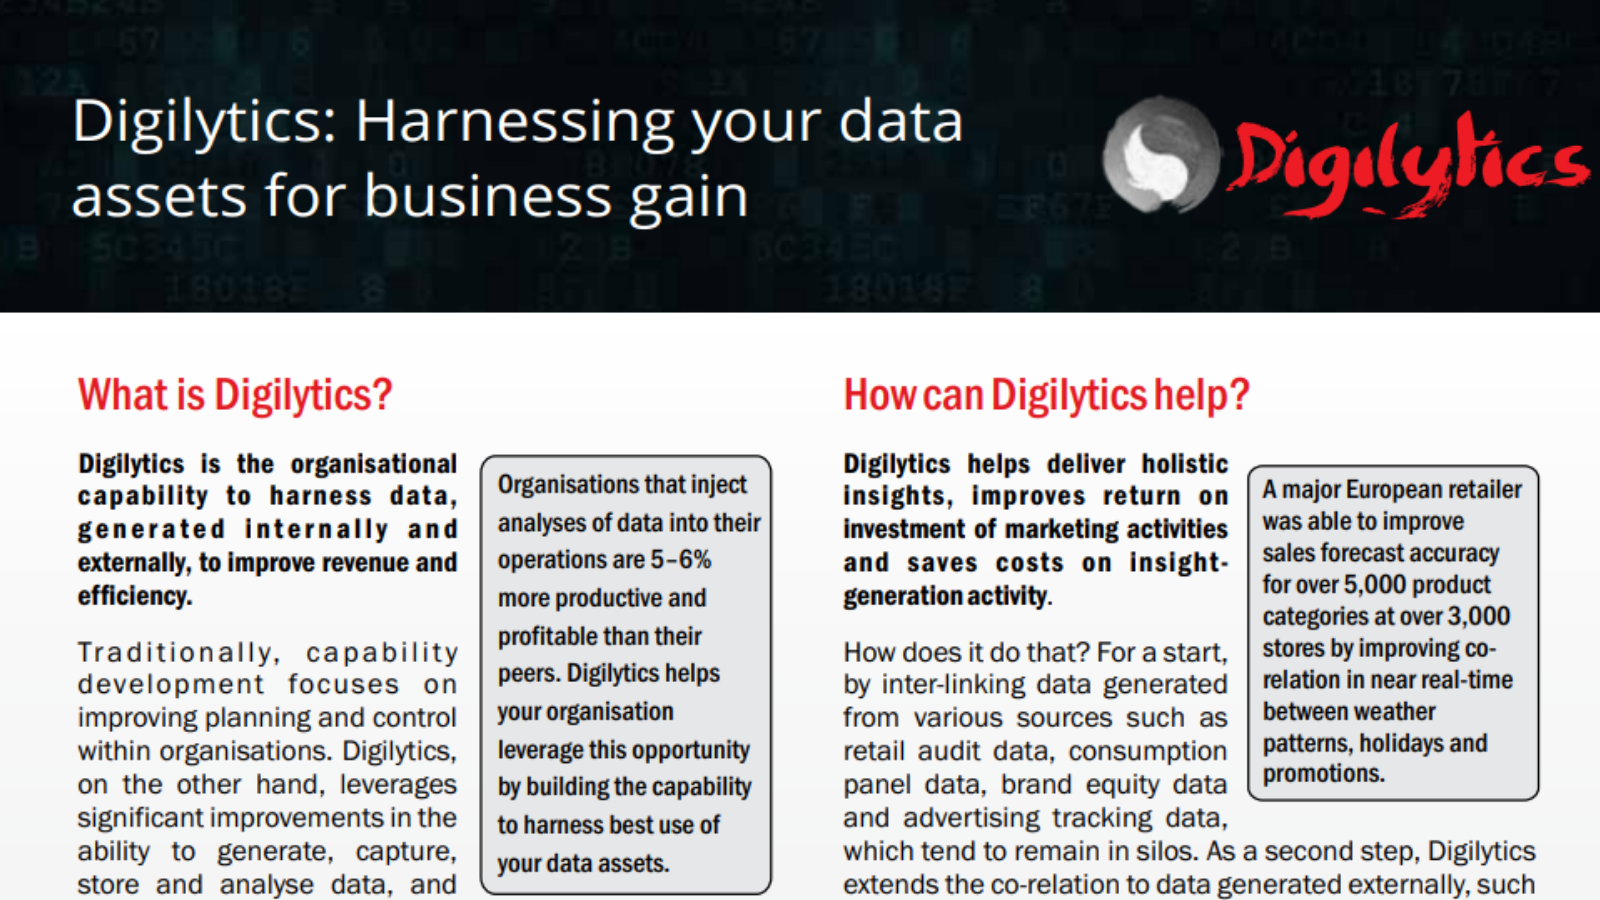 Harnessing your data assets